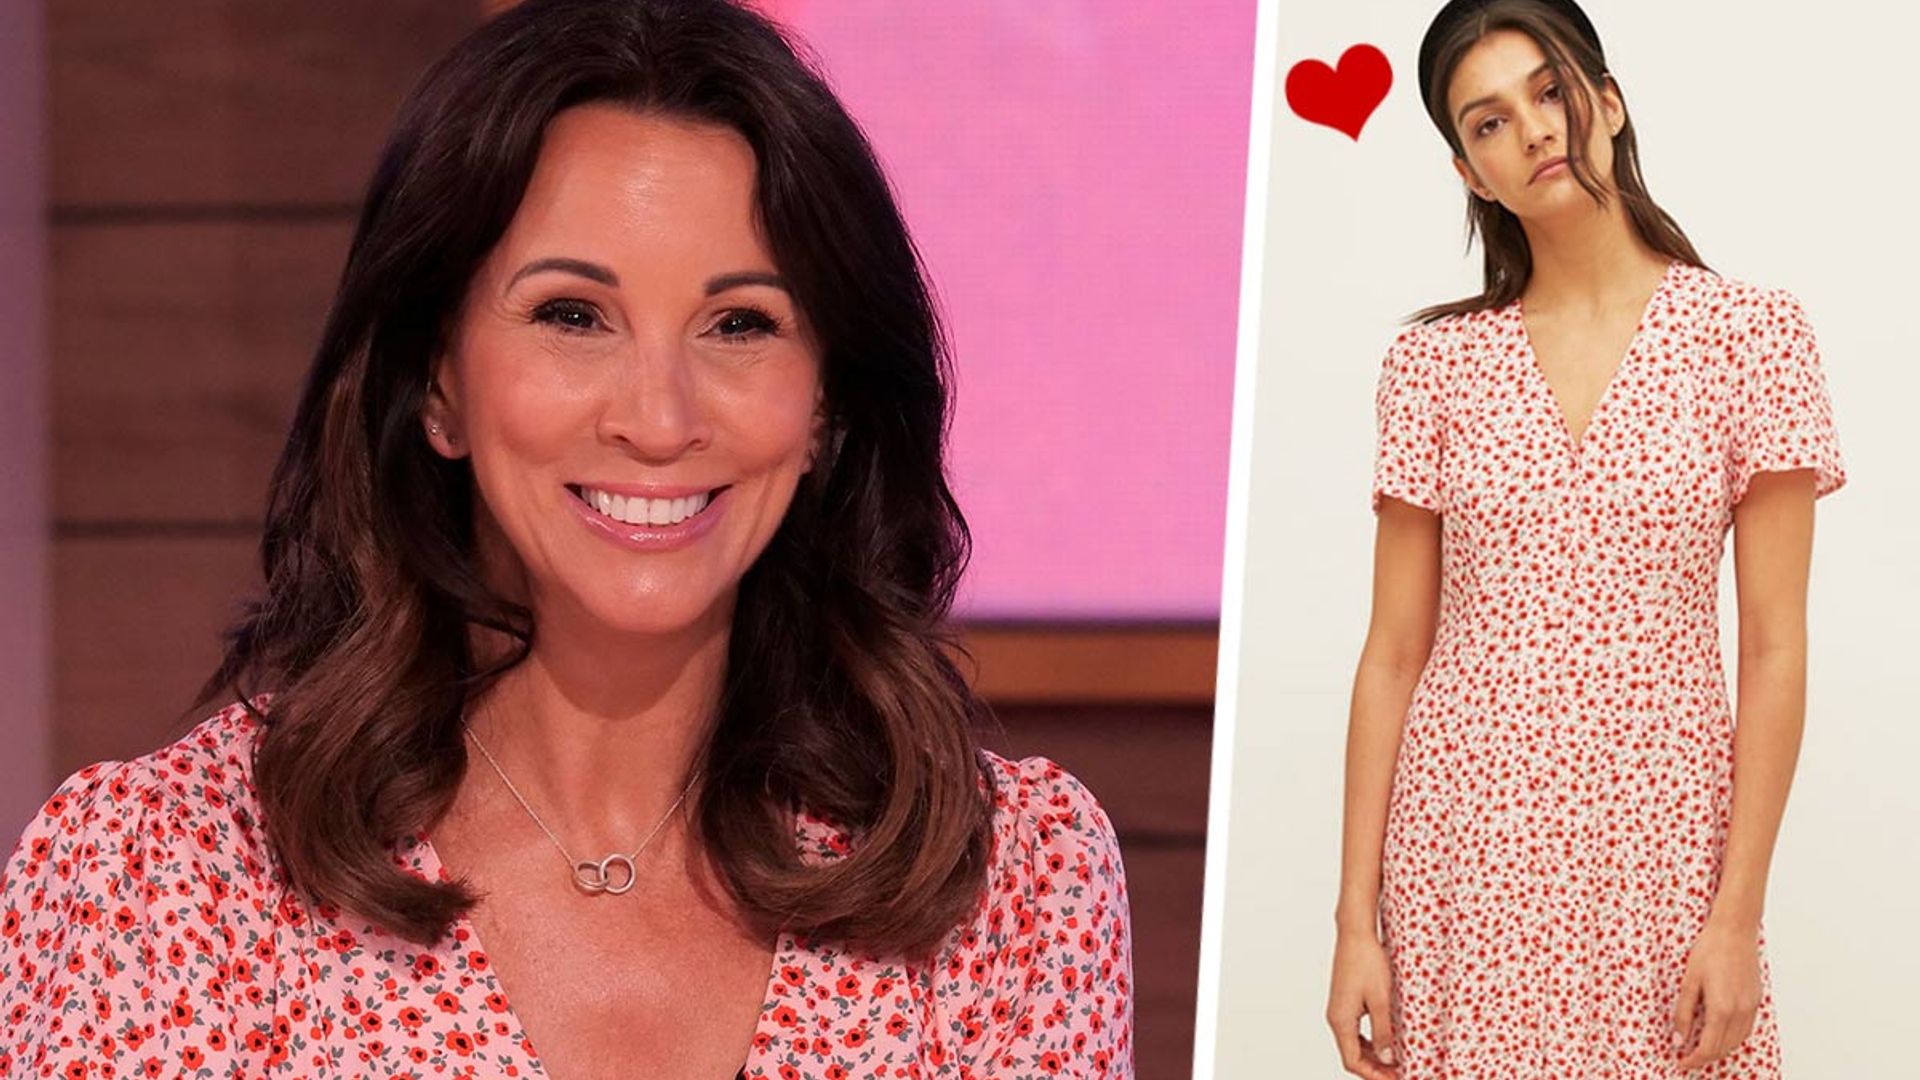 Andrea McLean floors fans in the dreamiest summer dress - and it's cheaper than you think